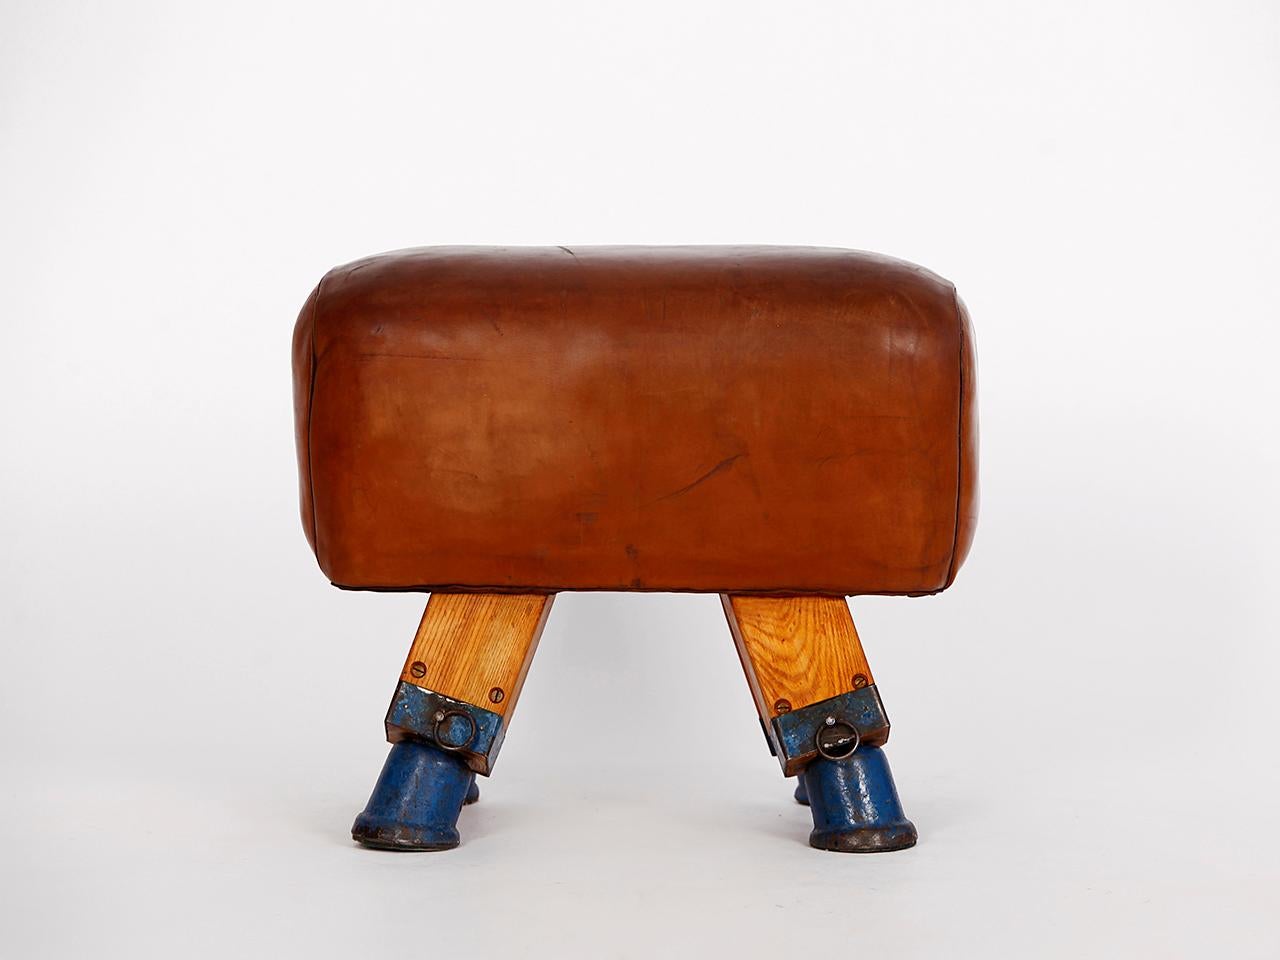 20th Century Vintage Czech Leather Turnbock Gym Stool Bench, 1930s